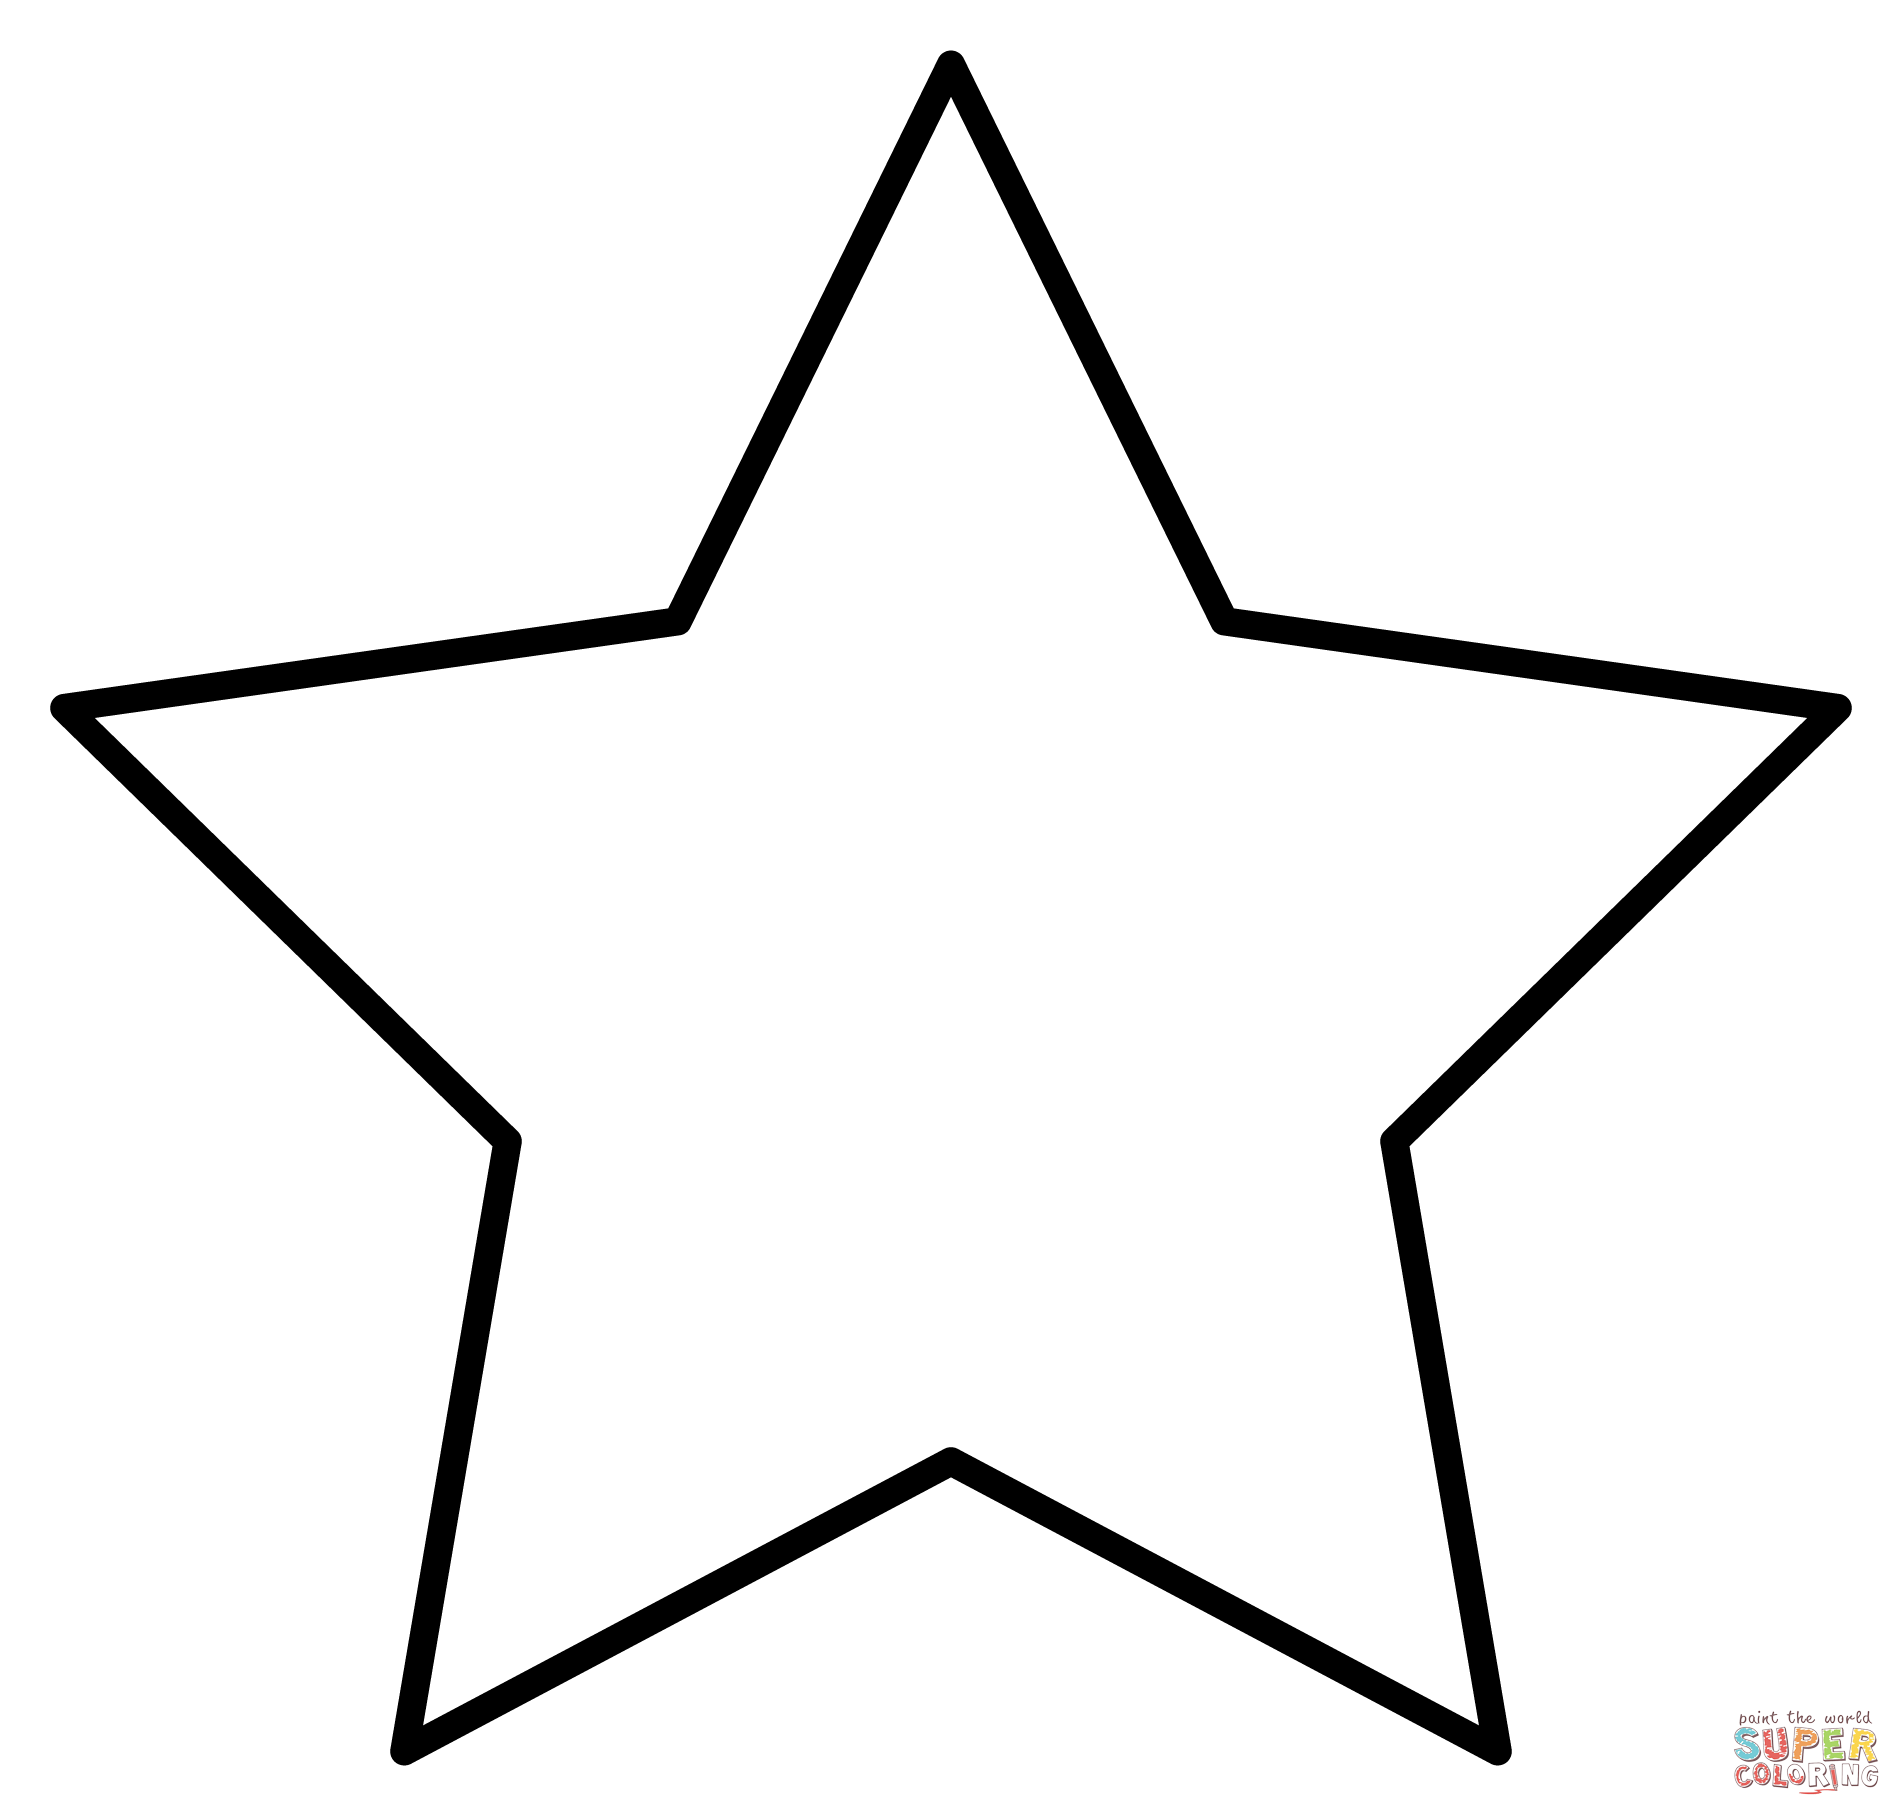 Star emoji coloring page free printable coloring pages